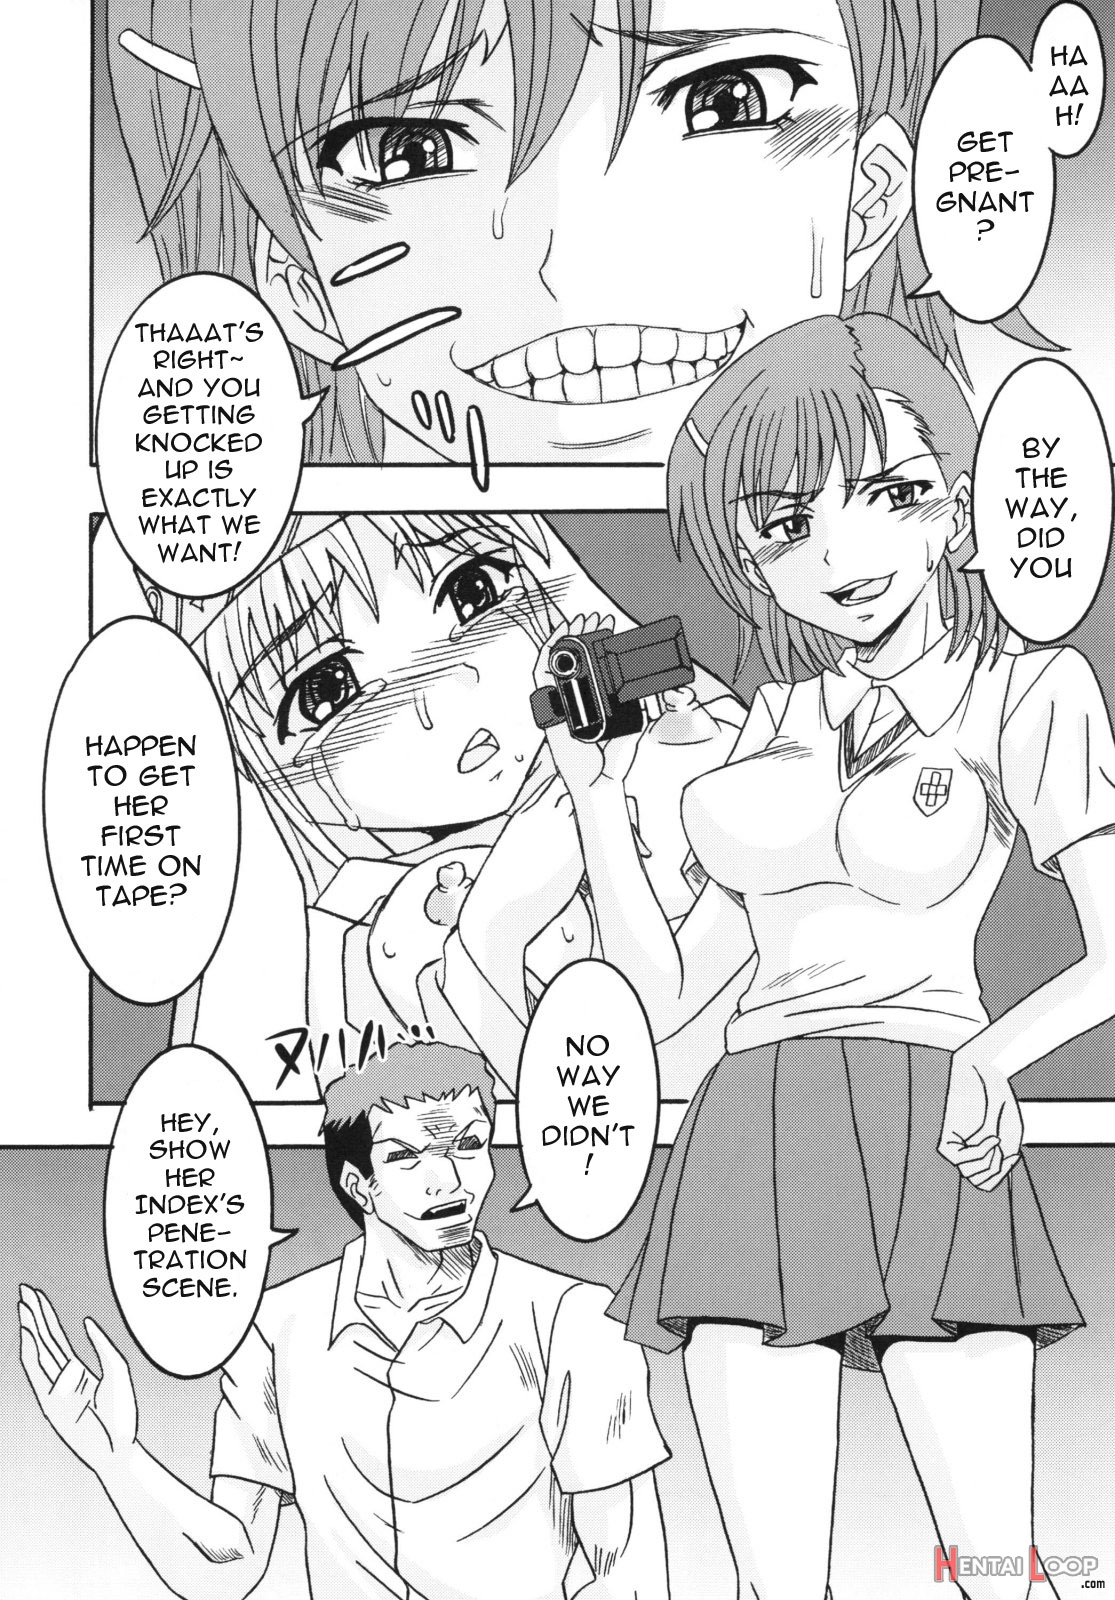 A Certain Magical Lewd Index #2 page 12